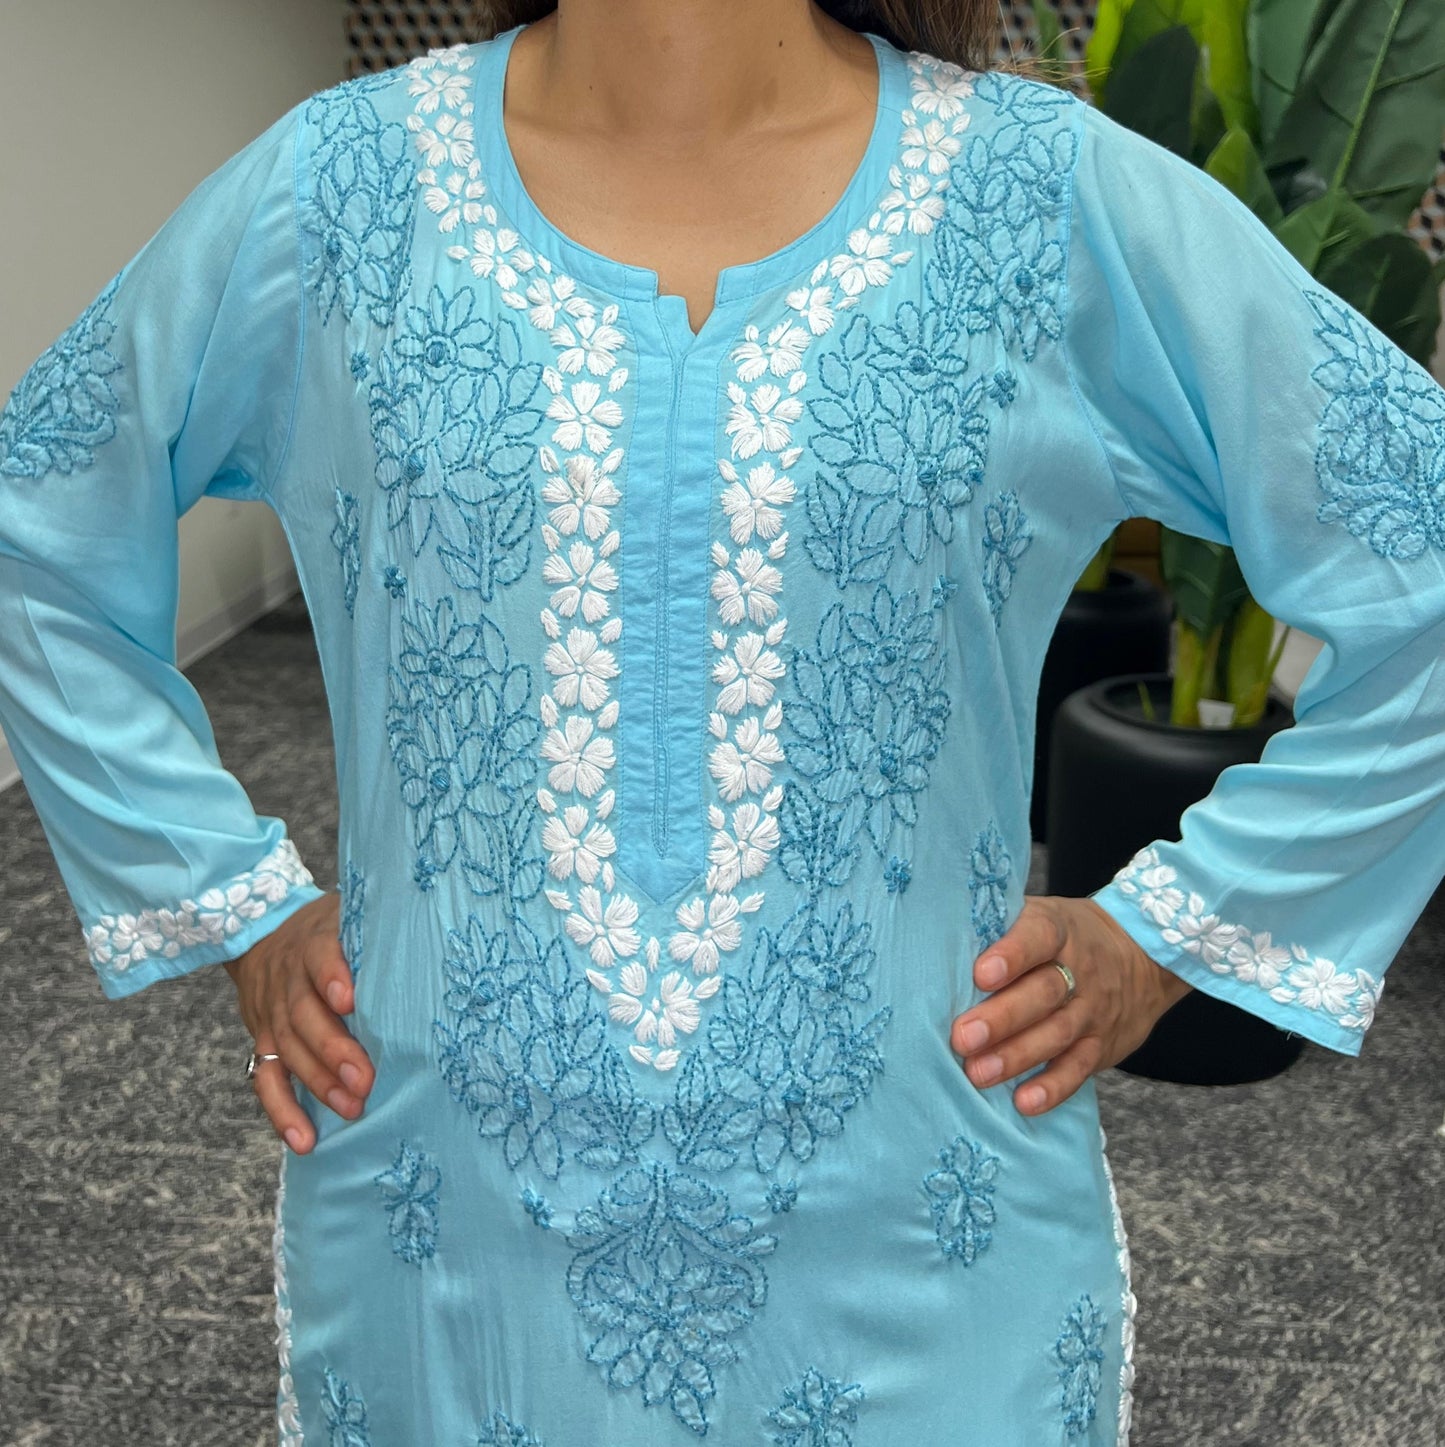 Chikankari floral border in white threads in neckline and floral bail and booti in dark blue threads